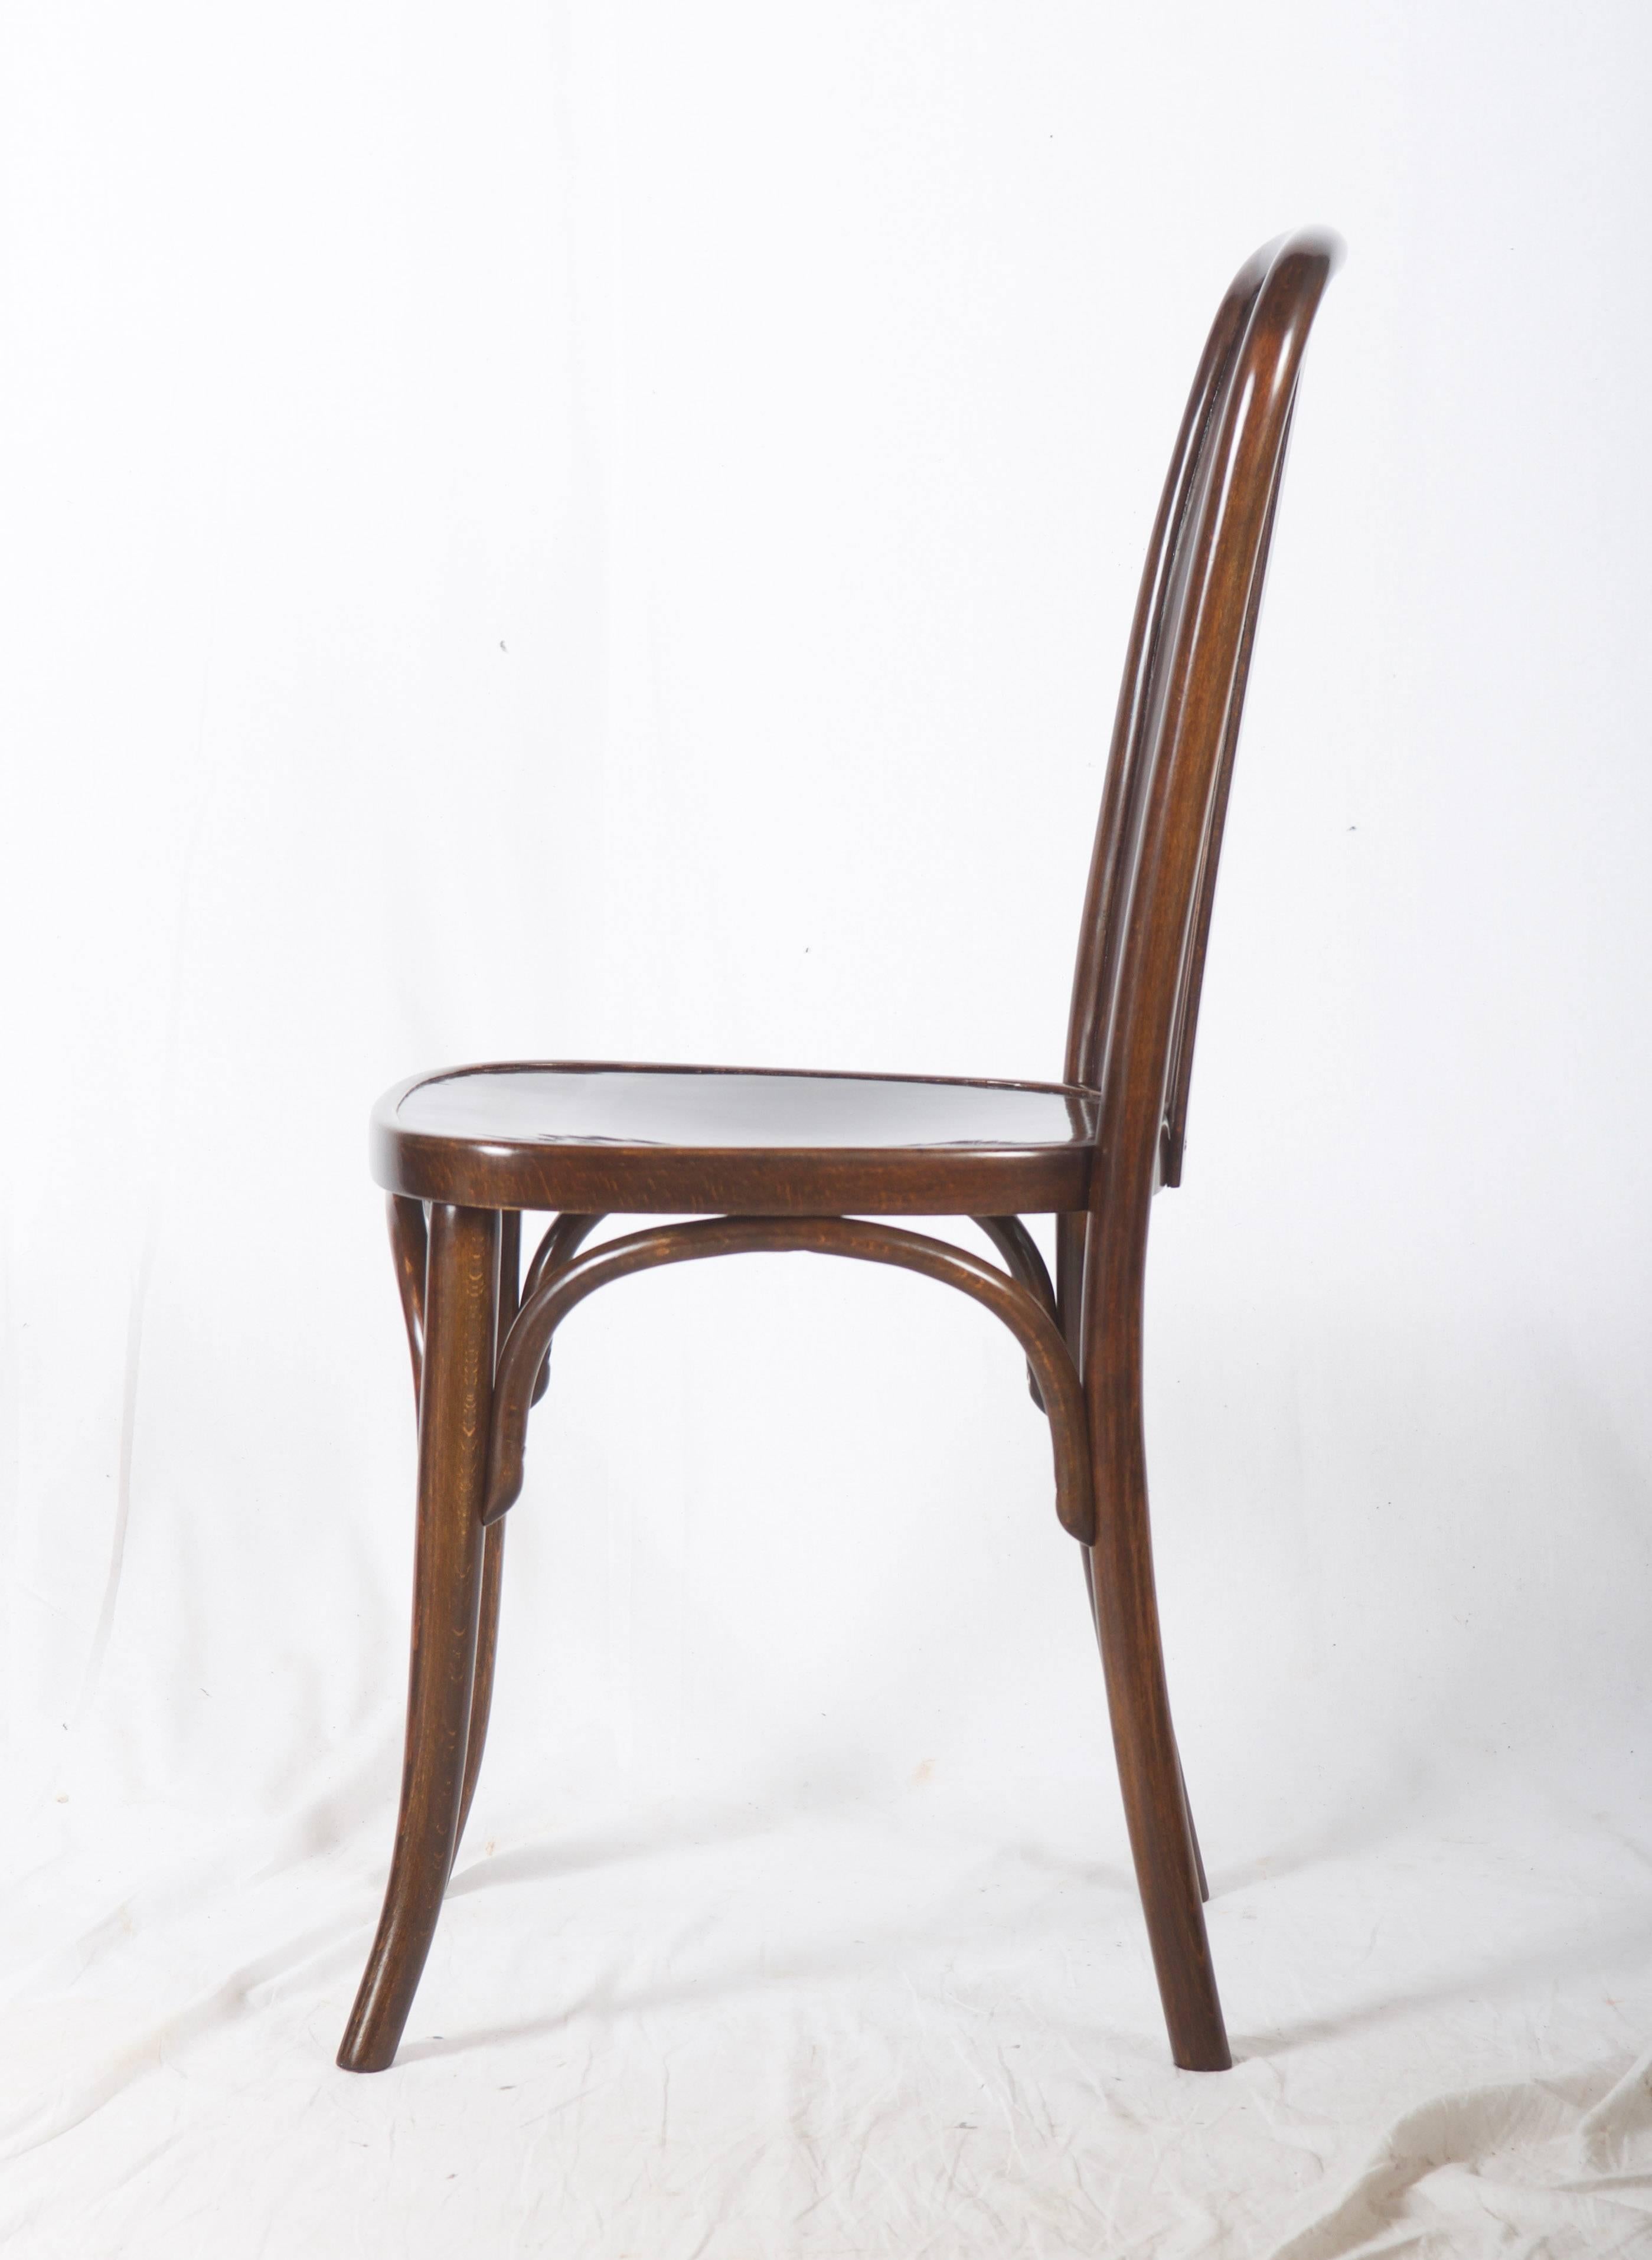 Early 20th Century Dining Chairs by Josef Hoffmann for Thonet